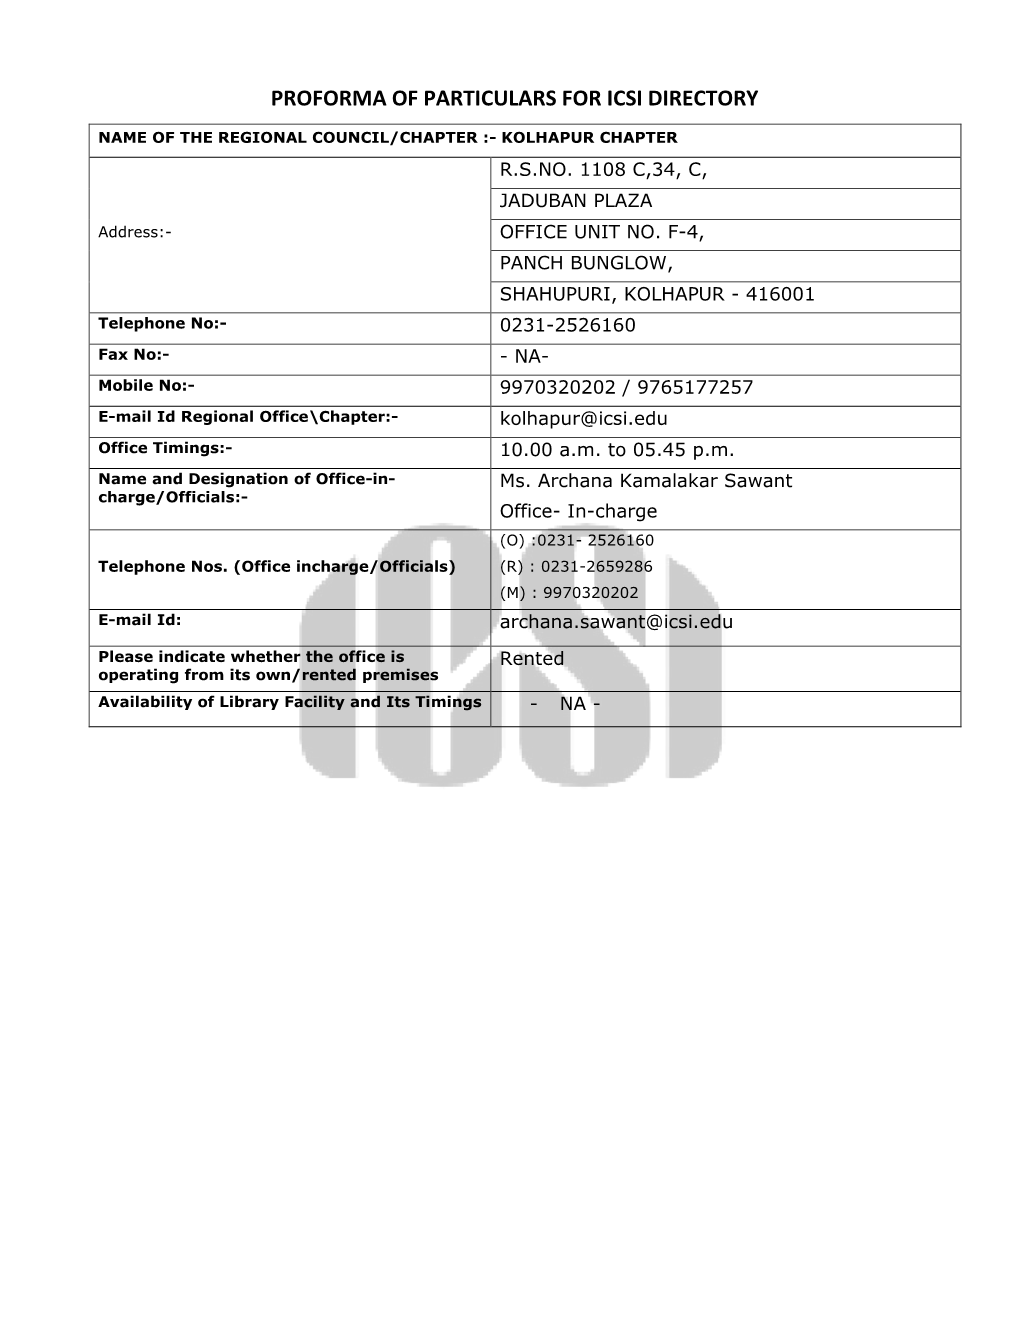 Proforma of Particulars for Icsi Directory